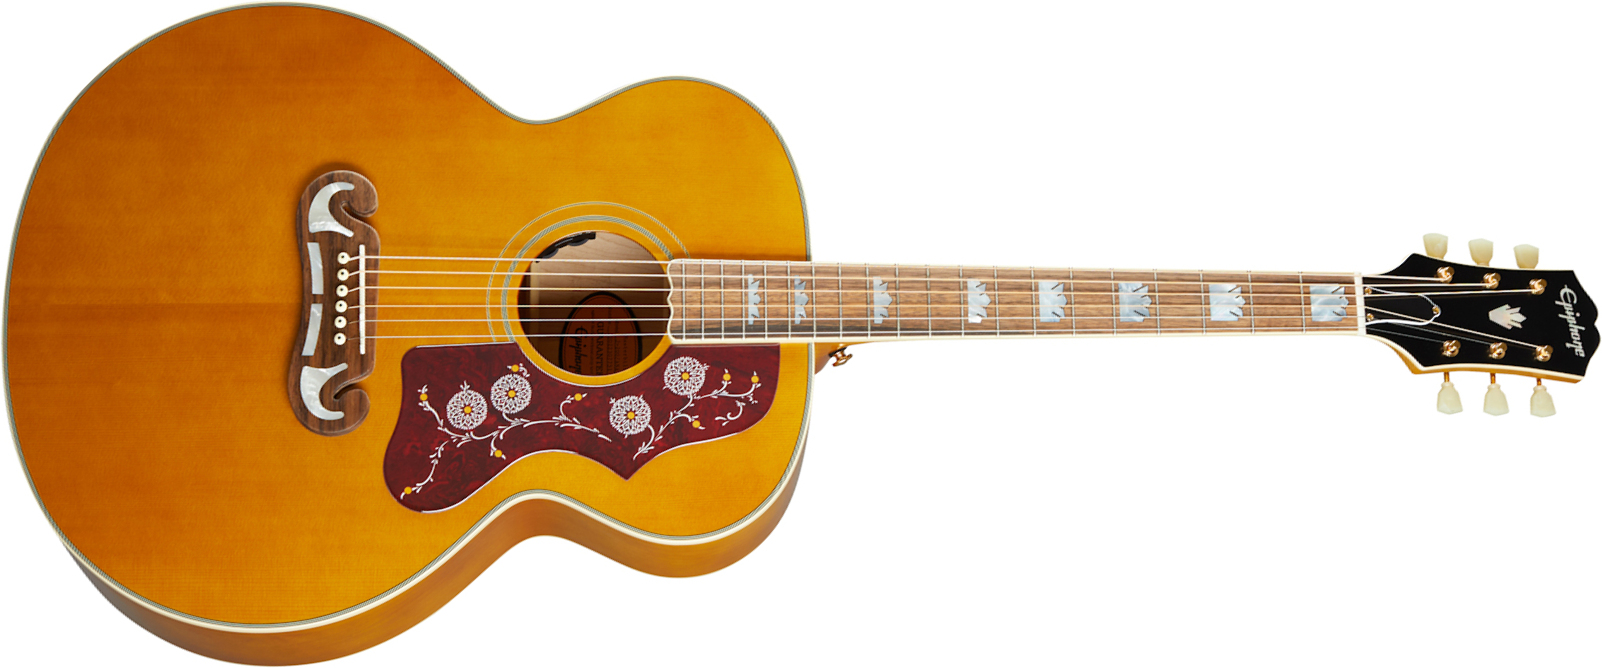 Epiphone J-200 Inspired By Gibson Jumbo Epicea Erable Lau - Aged Antique Natural - Guitare Electro Acoustique - Main picture